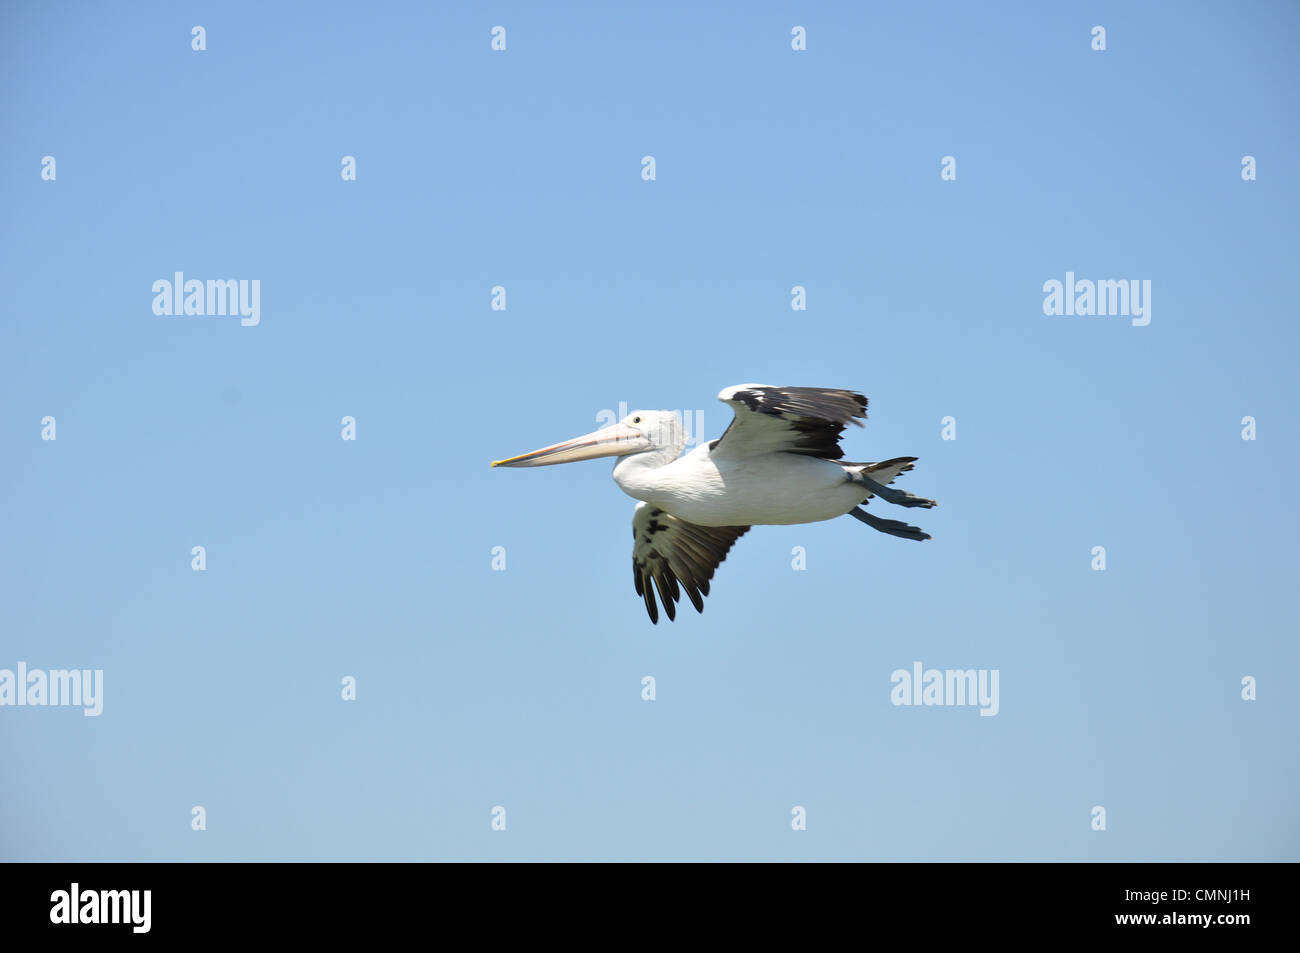 A Flying Pelican Stock Photo